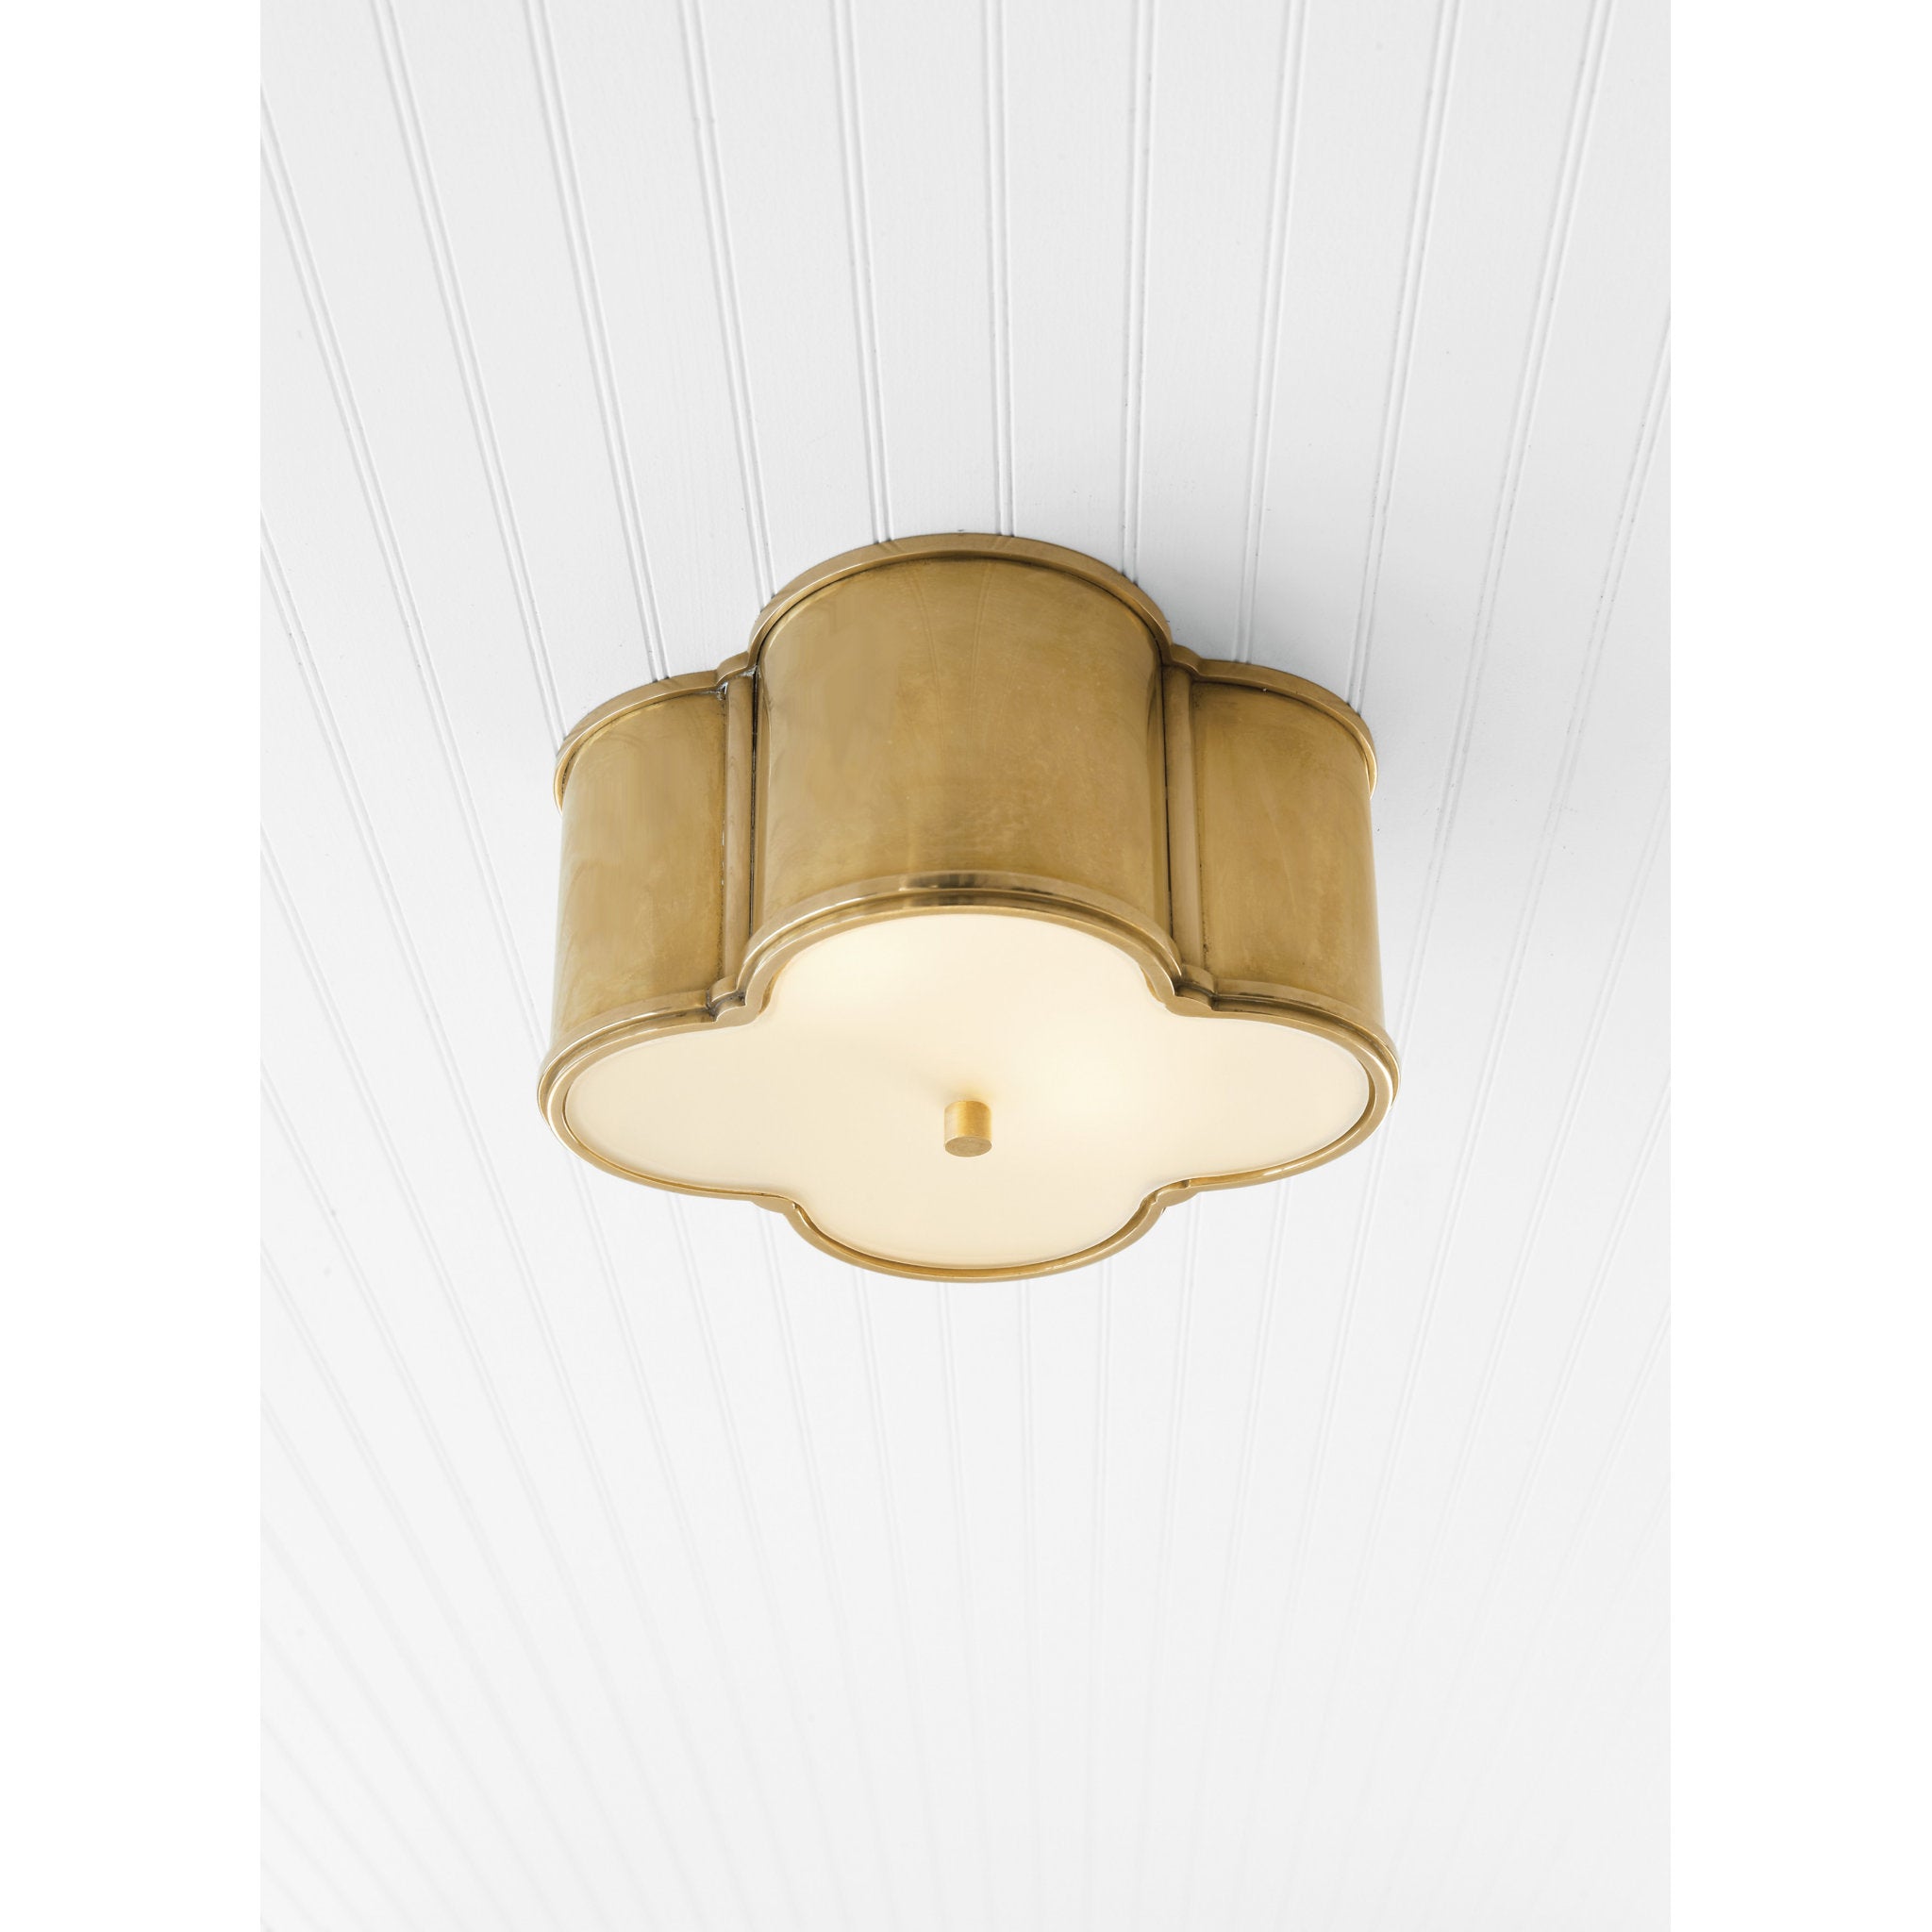 Alexa Hampton Basil Small Flush Mount in Natural Brass with Frosted Glass